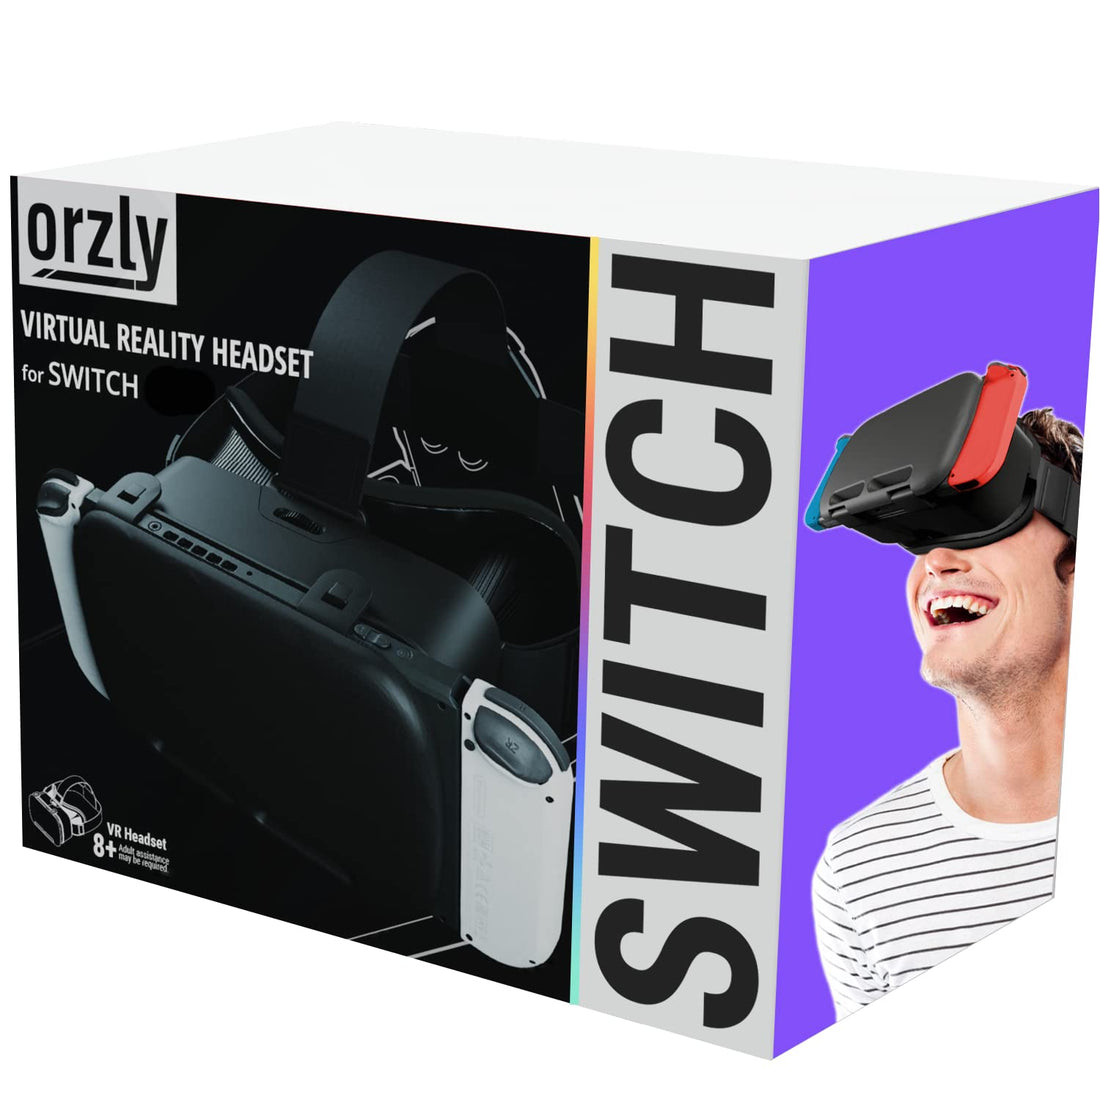 Orzly VR Headset Designed for Nintendo Switch & Switch OLED Console with Adjustable Lens for a Virtual Reality Gaming Experience and for Labo VR - Black - Gift Boxed Edition